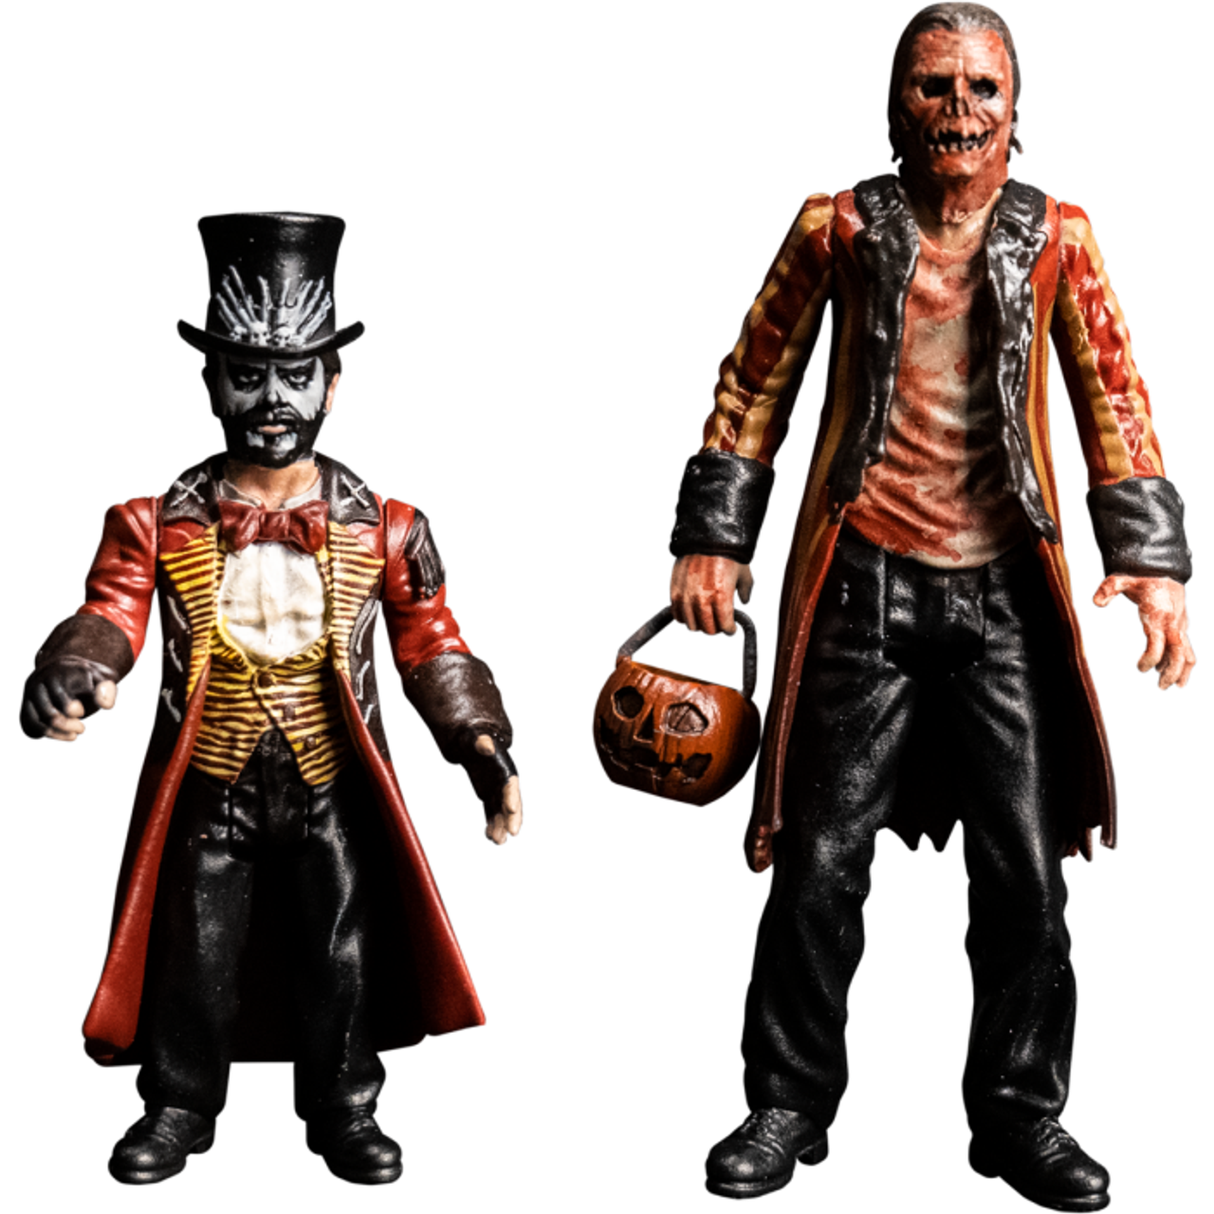 Candy Corn: Jacob & Dr. Death 3.75 Inch Action Figure (2 Pack)